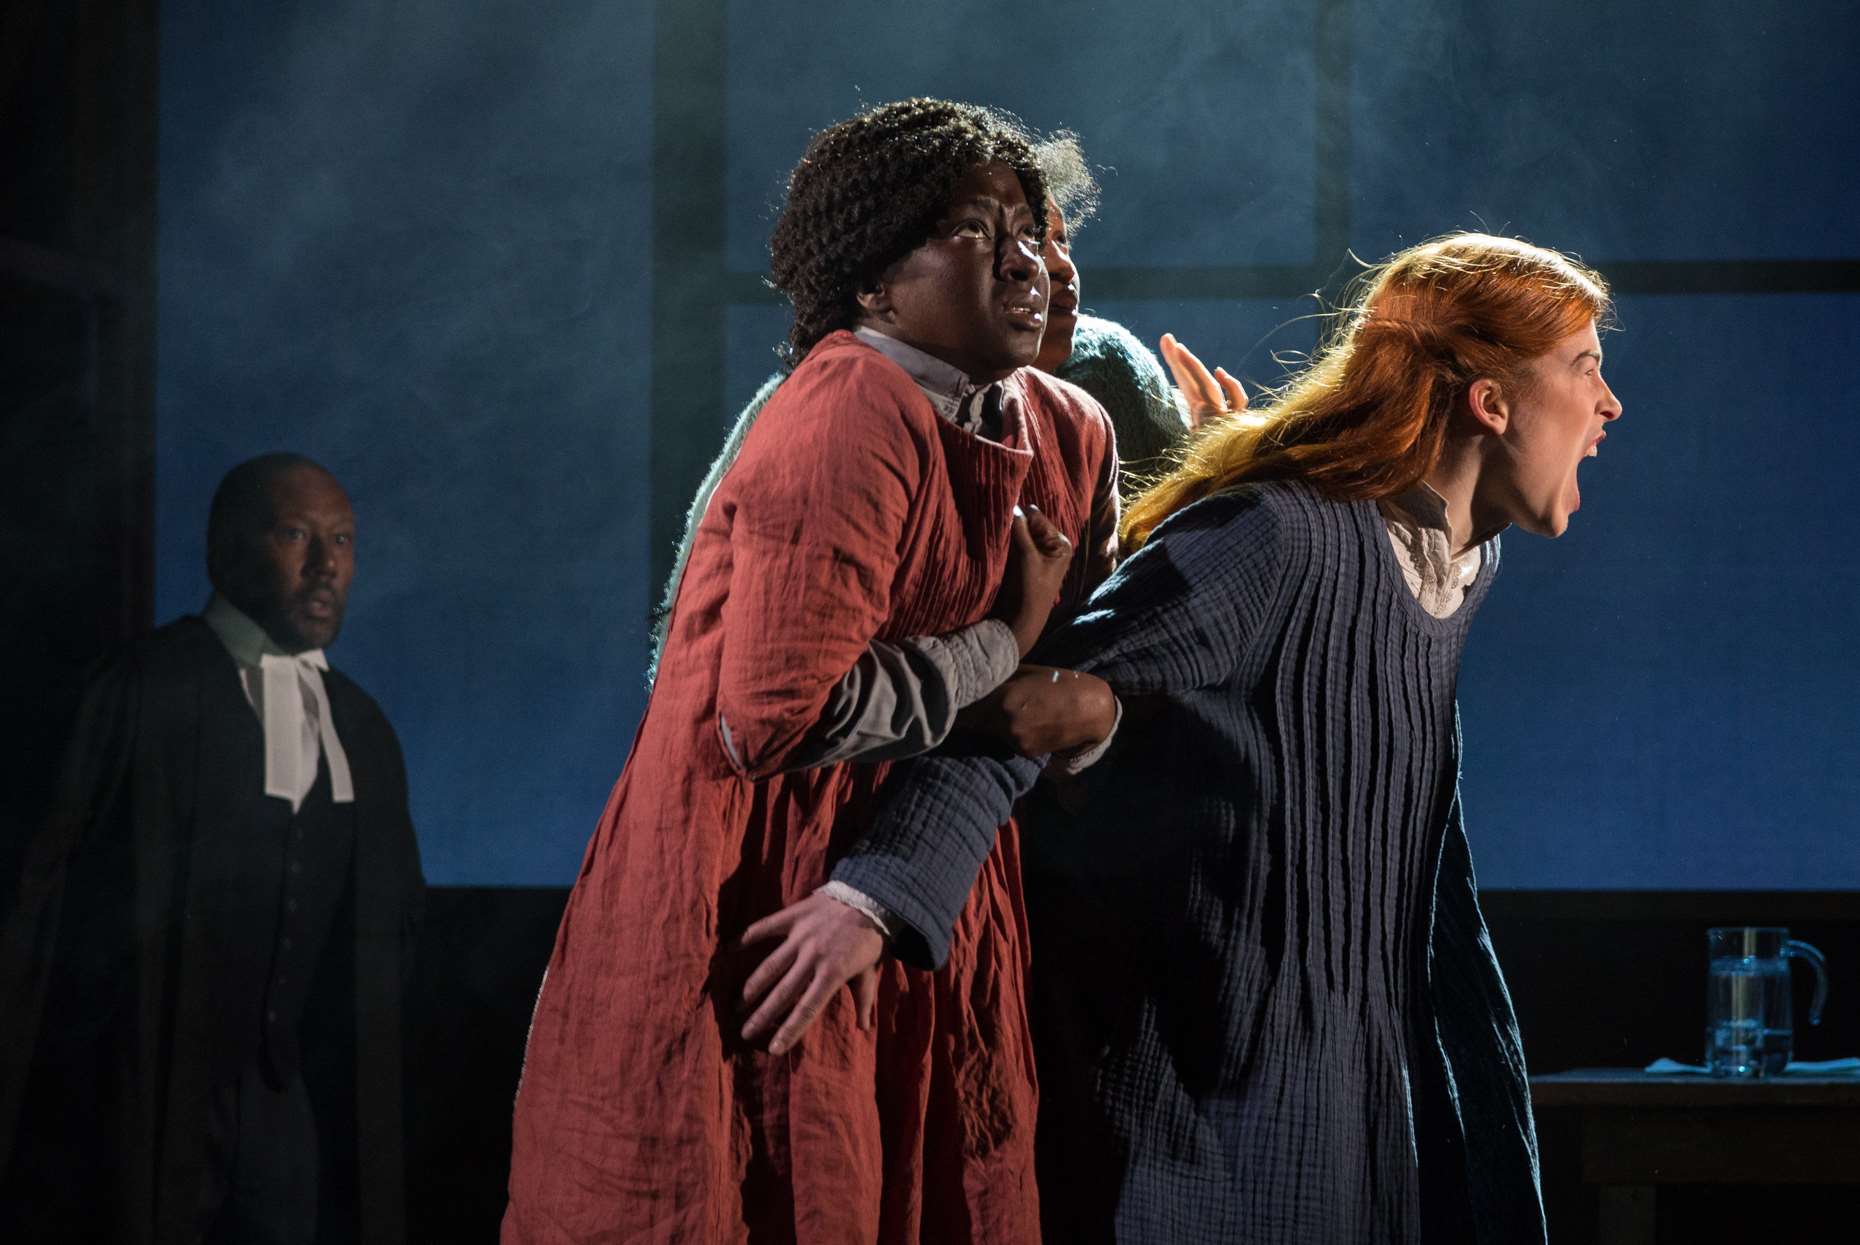 Arthur Miller's The Crucible is coming to Dartford's Orchard Theatre